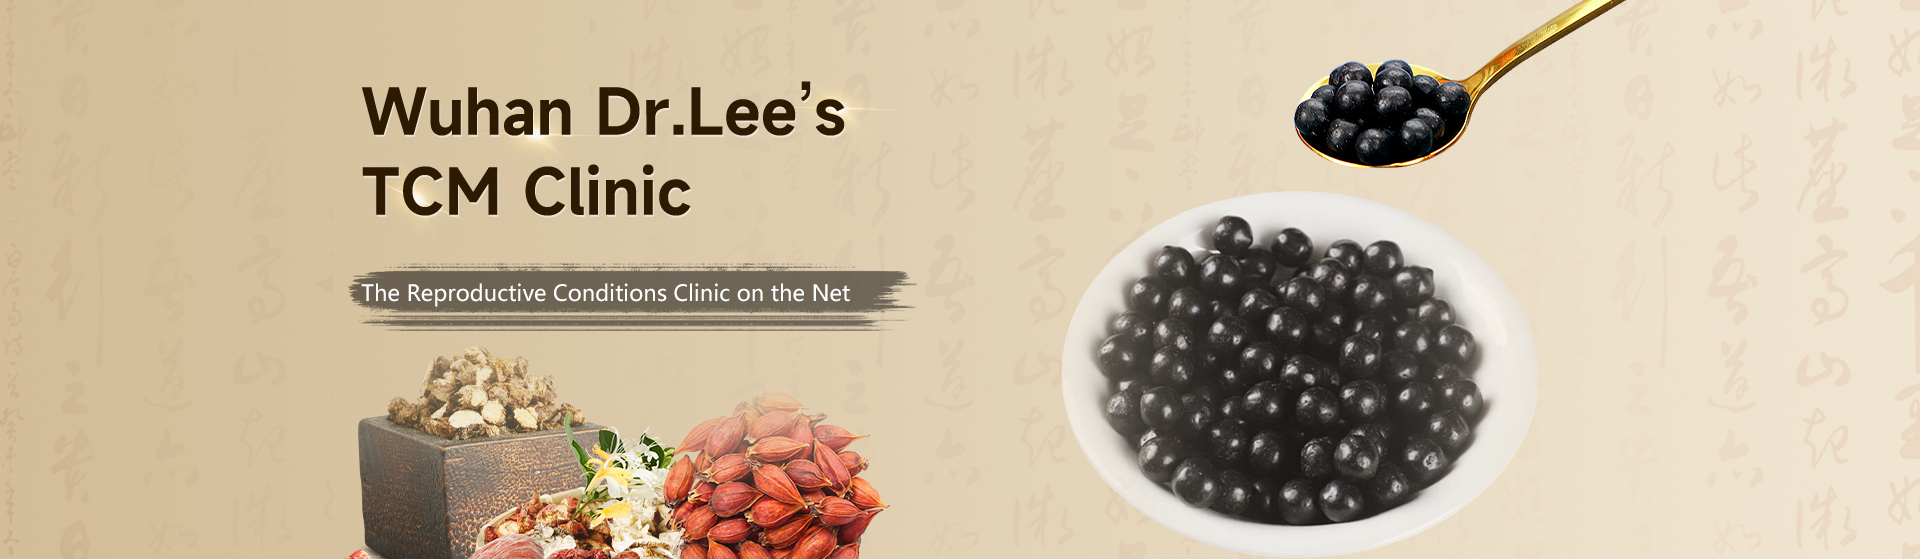 Wuhan Dr.Lee's TCM Clinic